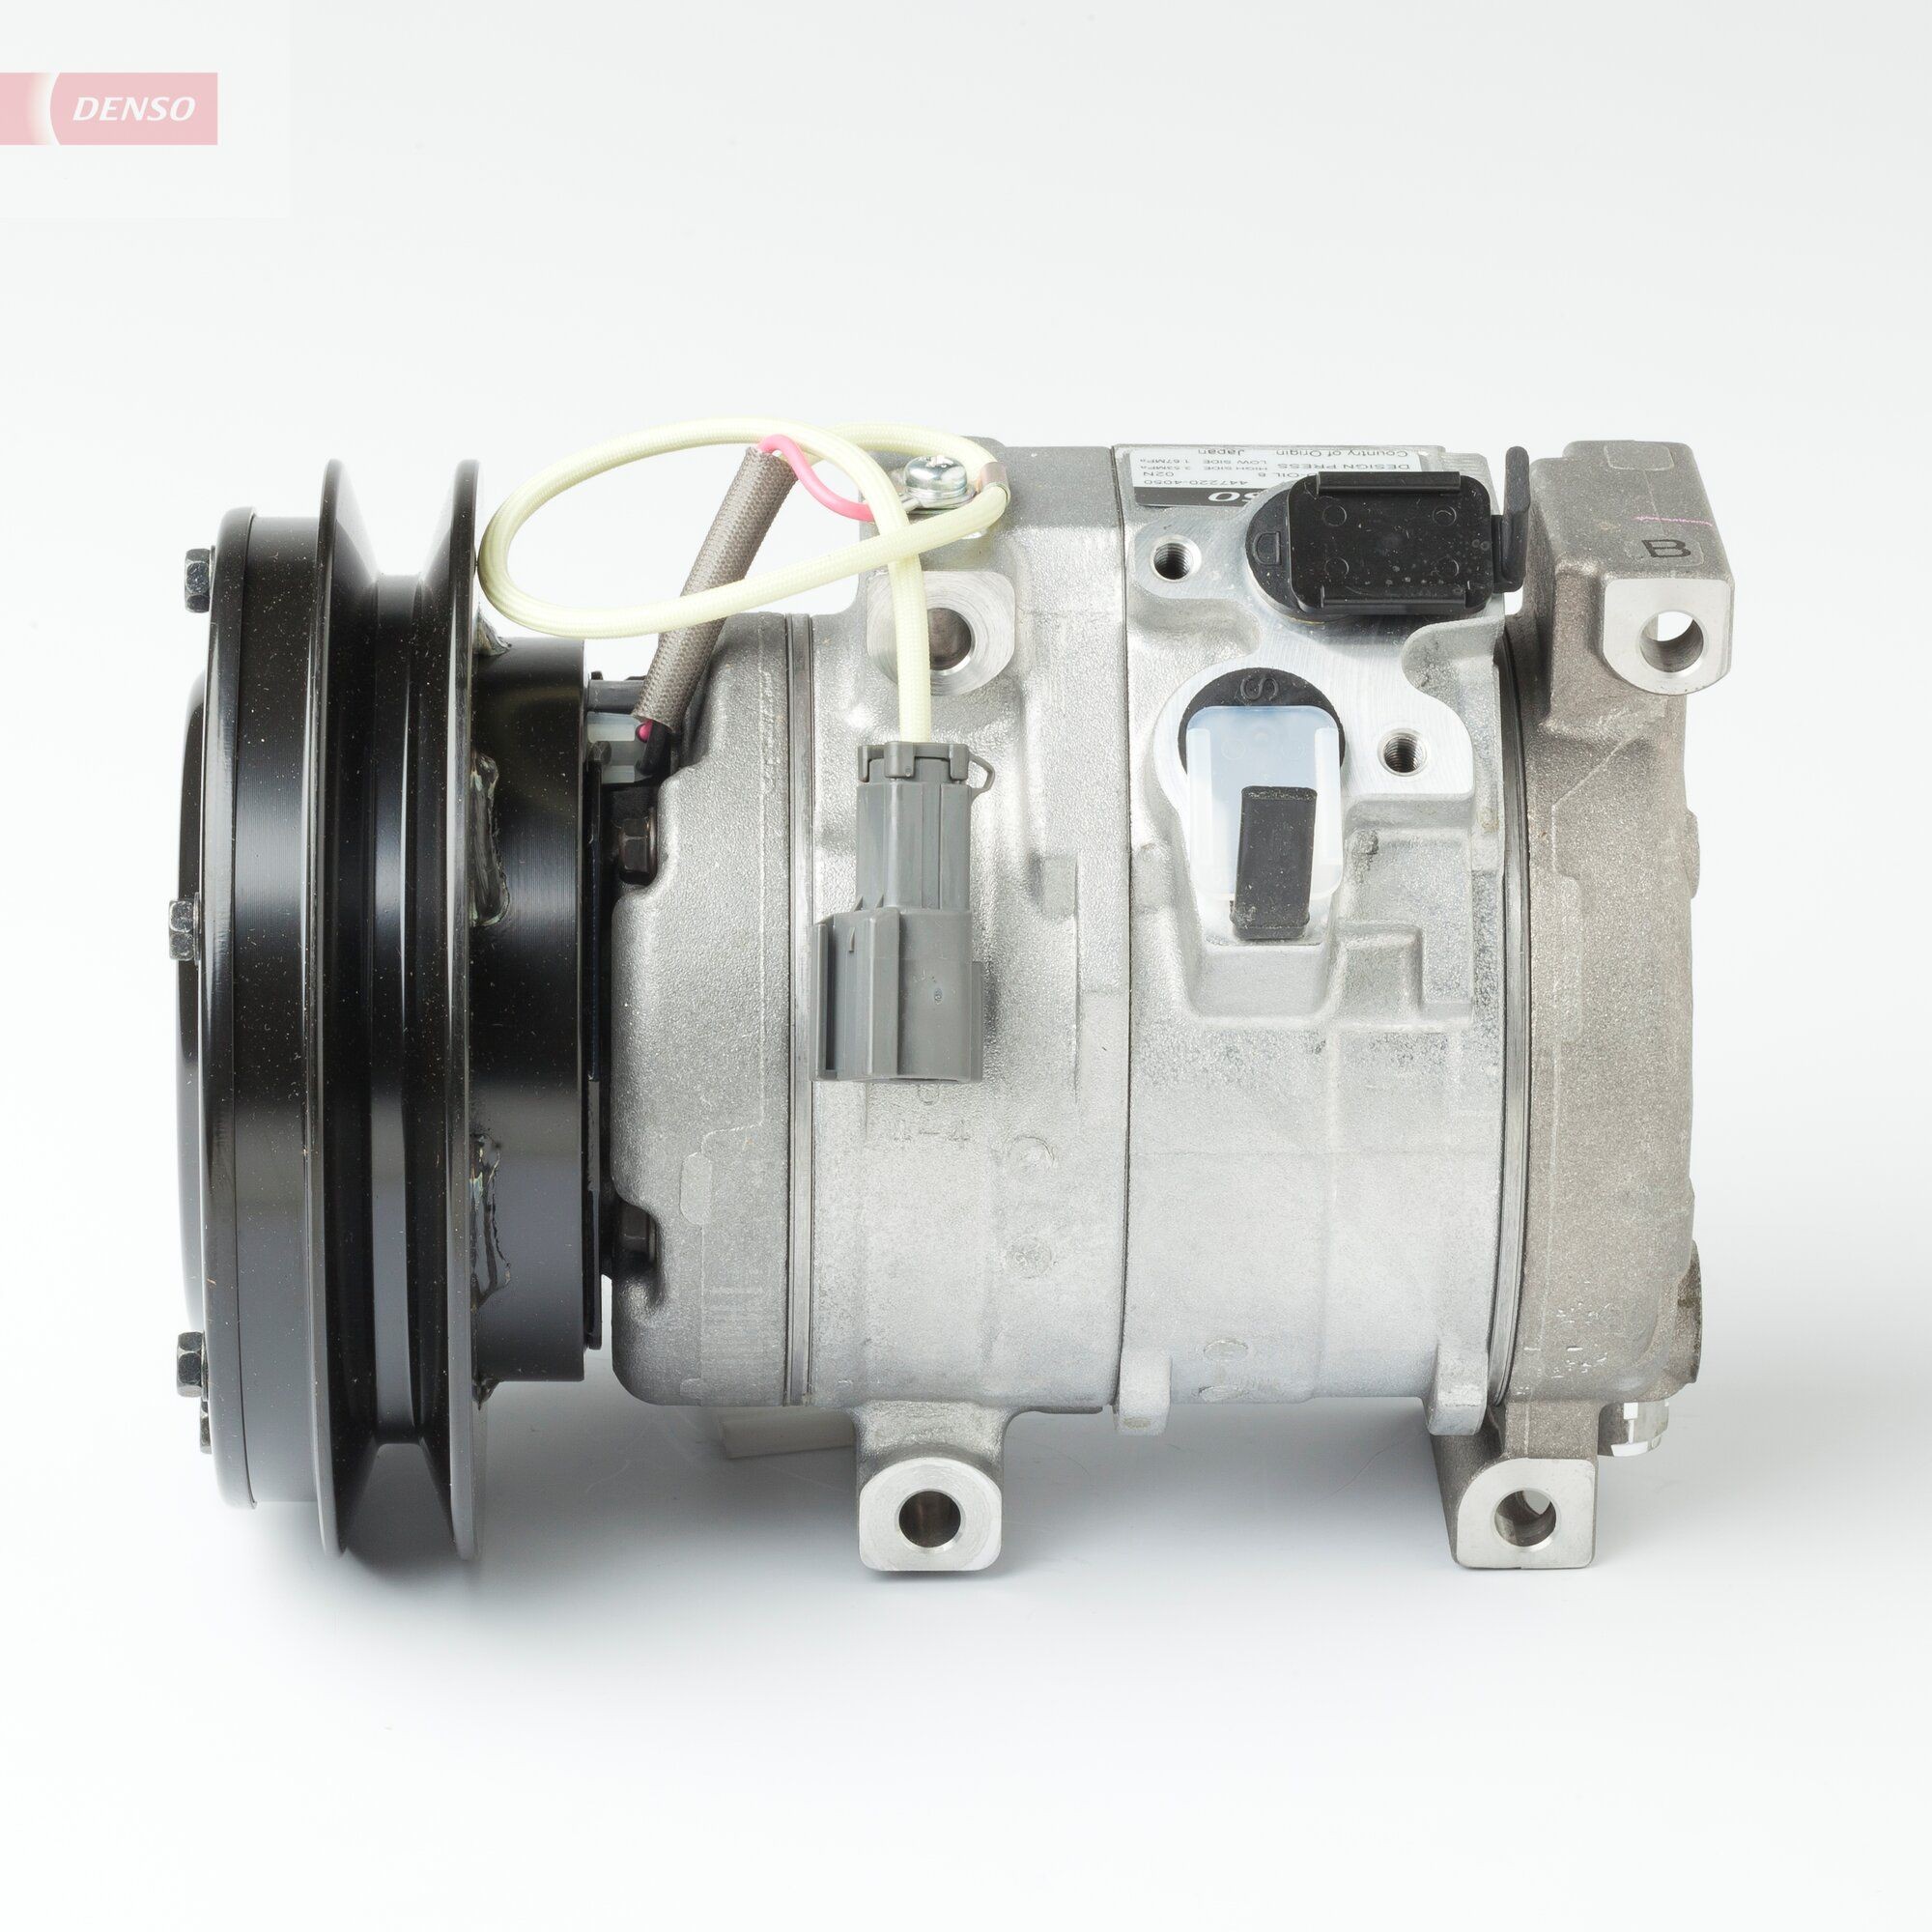 DENSO 10S15C, 24V, PAG 46, R 134a, with magnetic clutch Belt Pulley Ø: 150mm, Number of grooves: 1 AC compressor DCP99822 buy